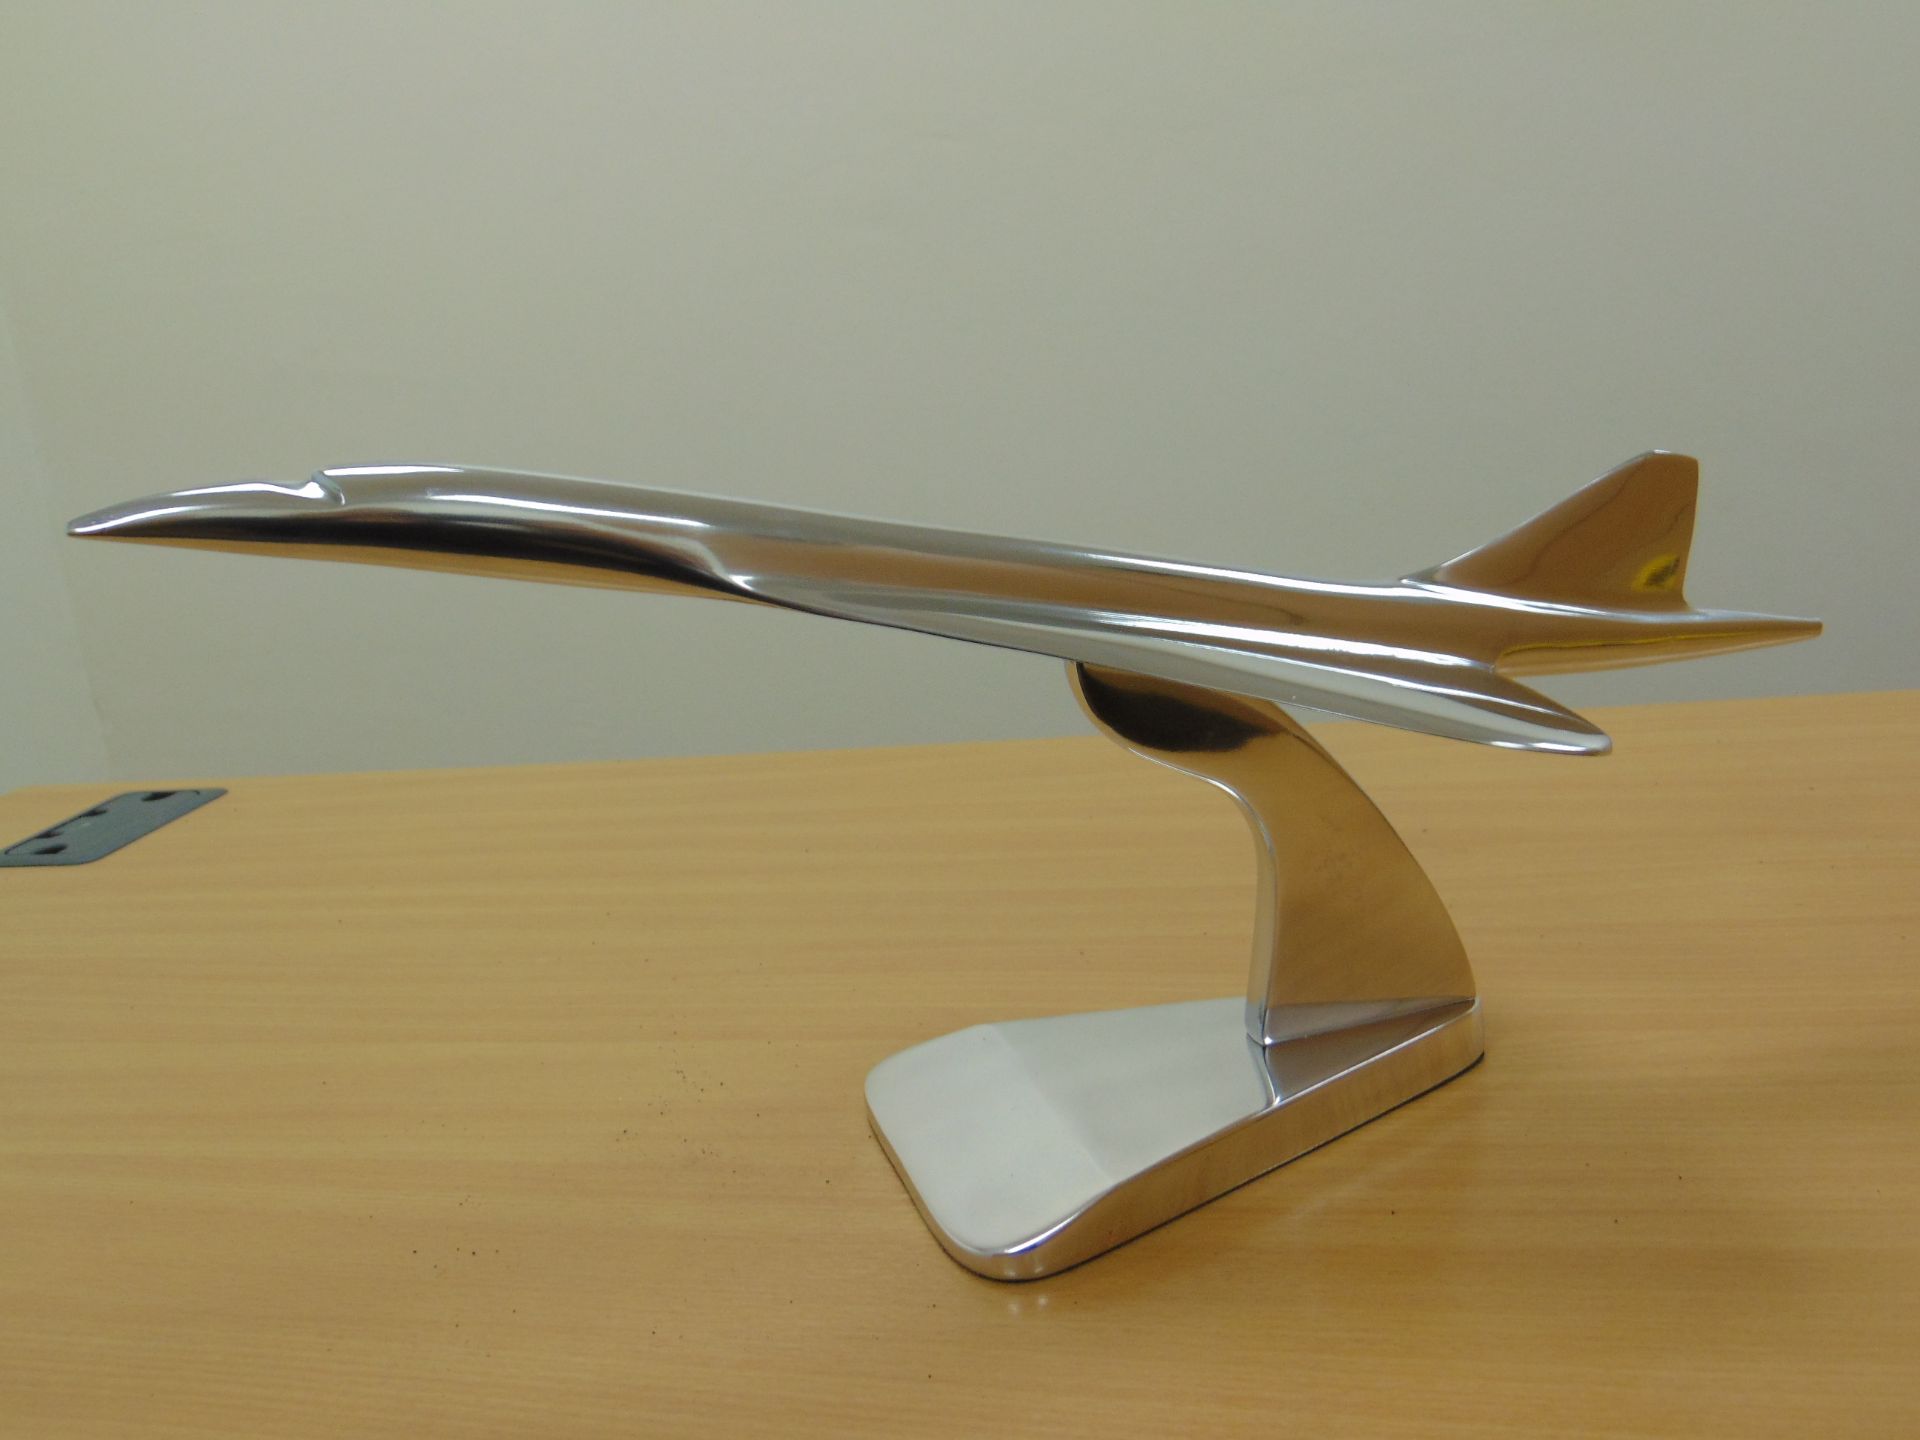 STUNNING POLISHED ALLUMINUM DESK TOP MODEL OF A CONCORD IN FLIGHT ON STAND - Image 6 of 12